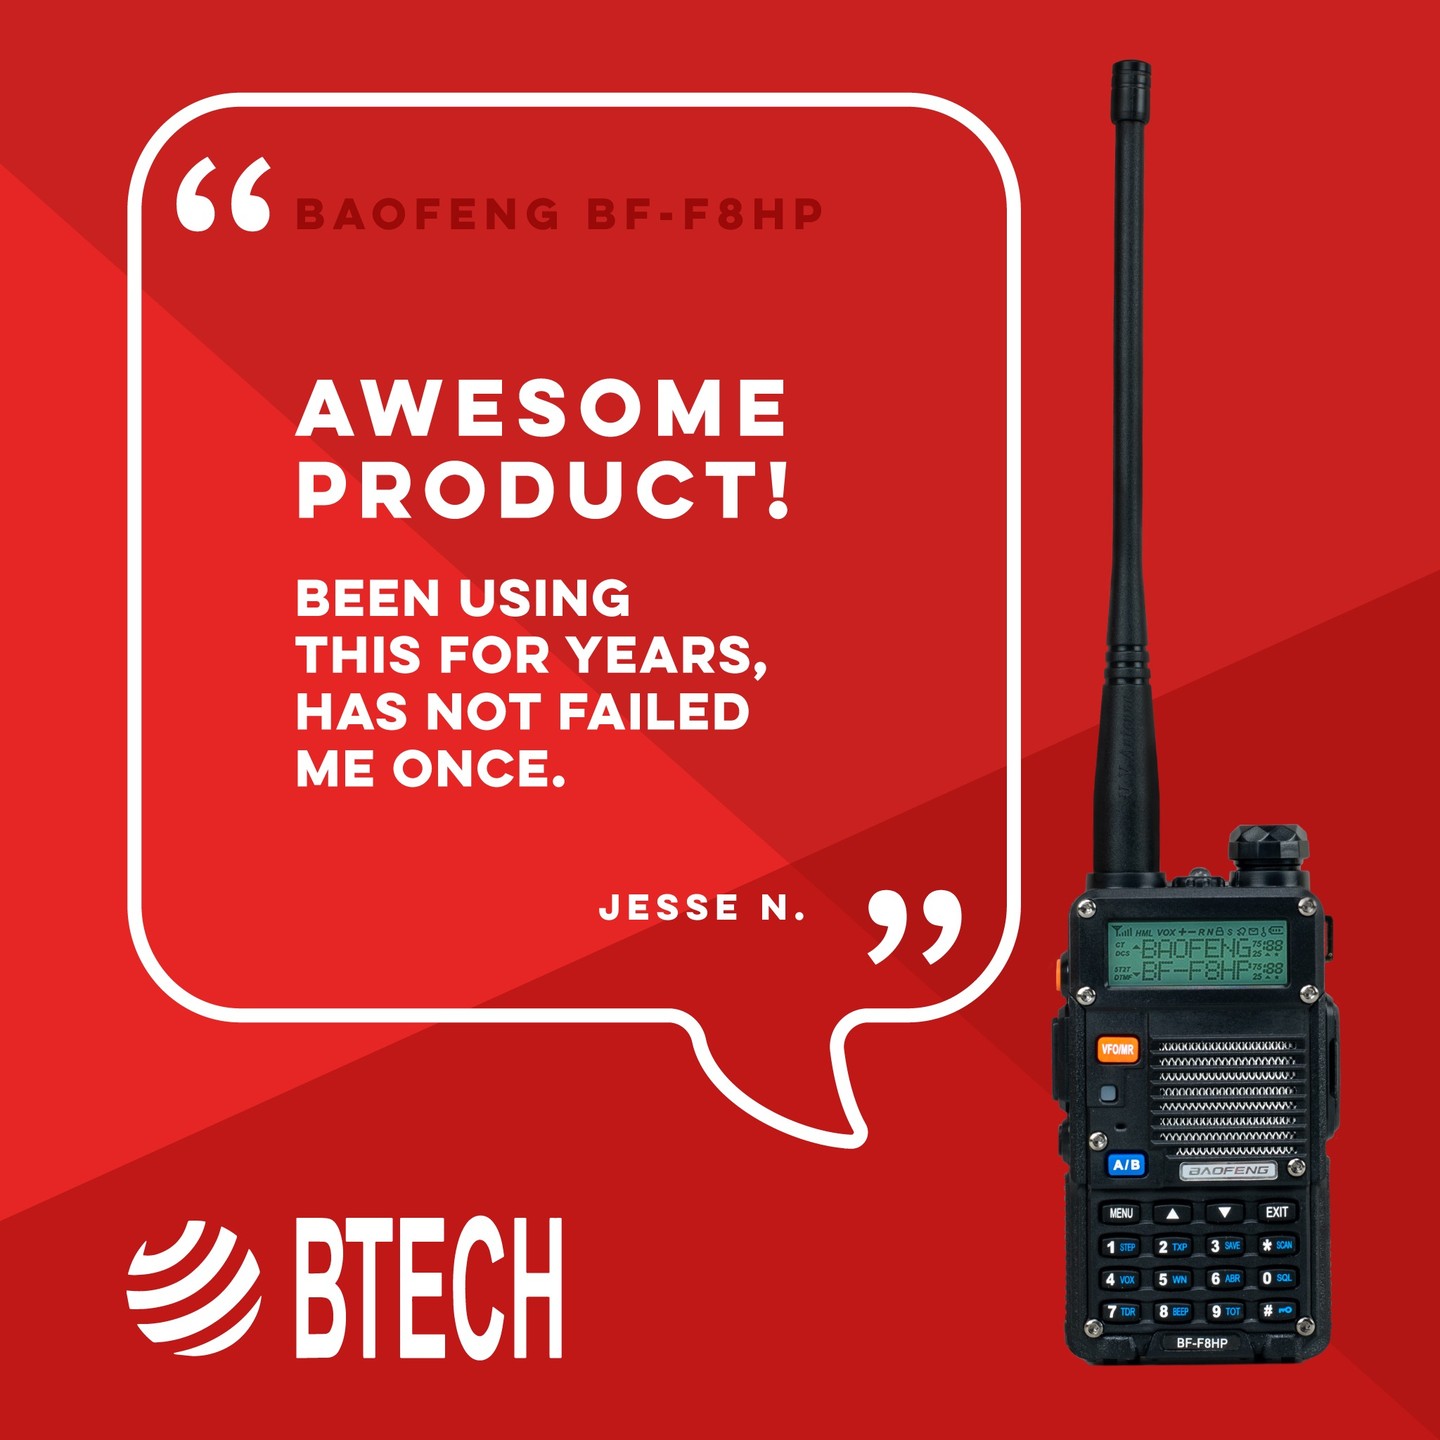 With twice the output power and 30% more battery, it is no wonder customers swear by the BF-F8HP. #hamradio #amateurradio #radioamateur #arrl #hamradiooperator #hamradios #btech #baofeng #bff8hp #vhf #fenggang #radiocommunication #edc